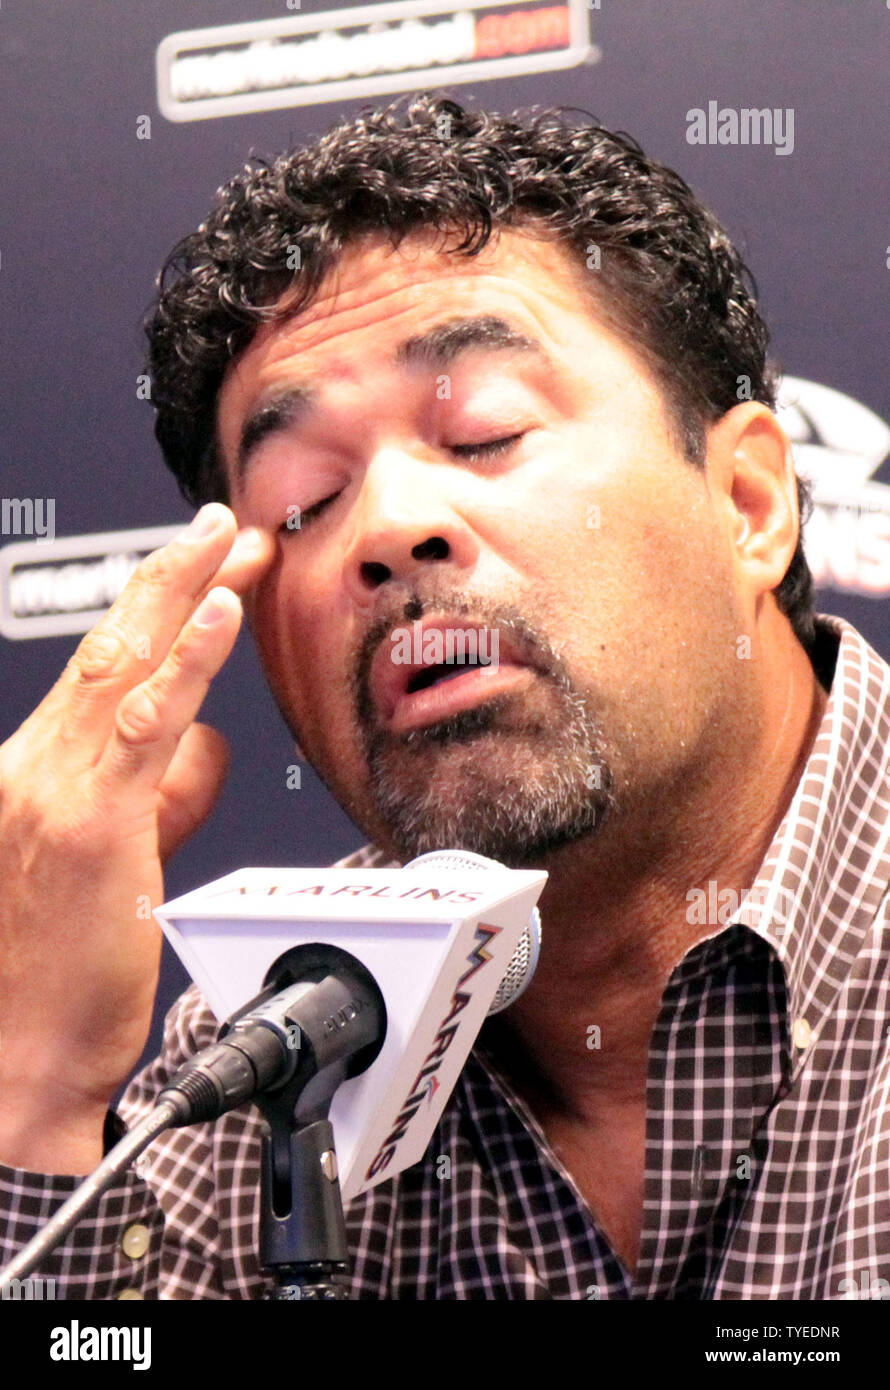 Ozzie Guillen And The Castro Comments That Make Us All Look Stupid 